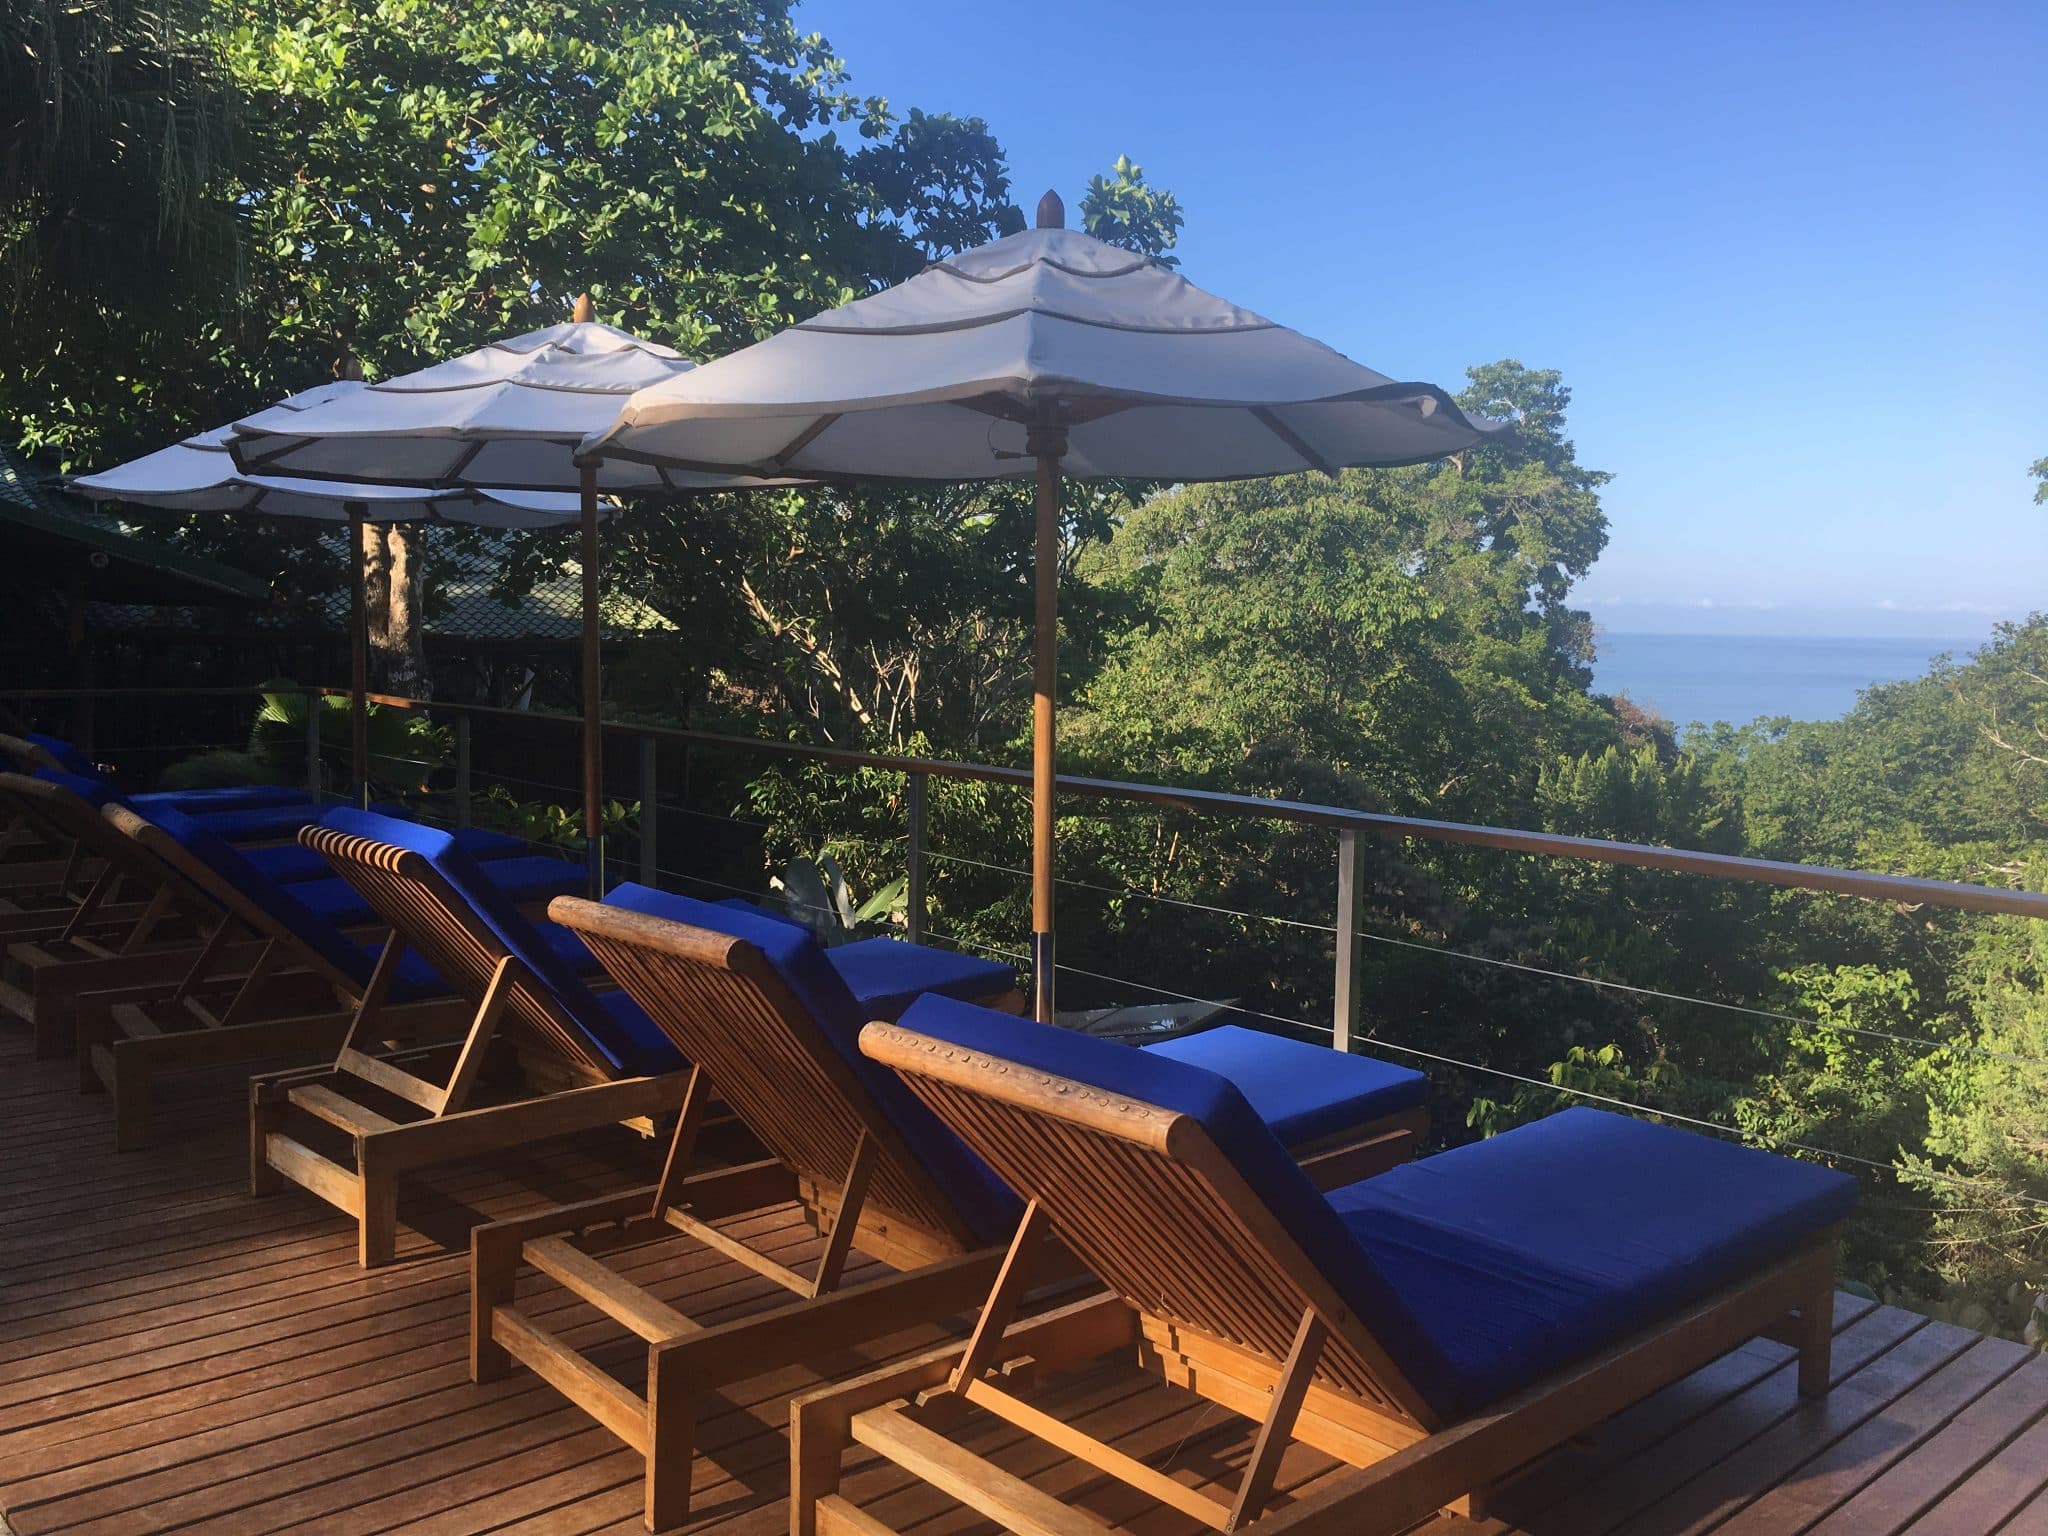 A remote rainforest stay at El Remanso Lodge